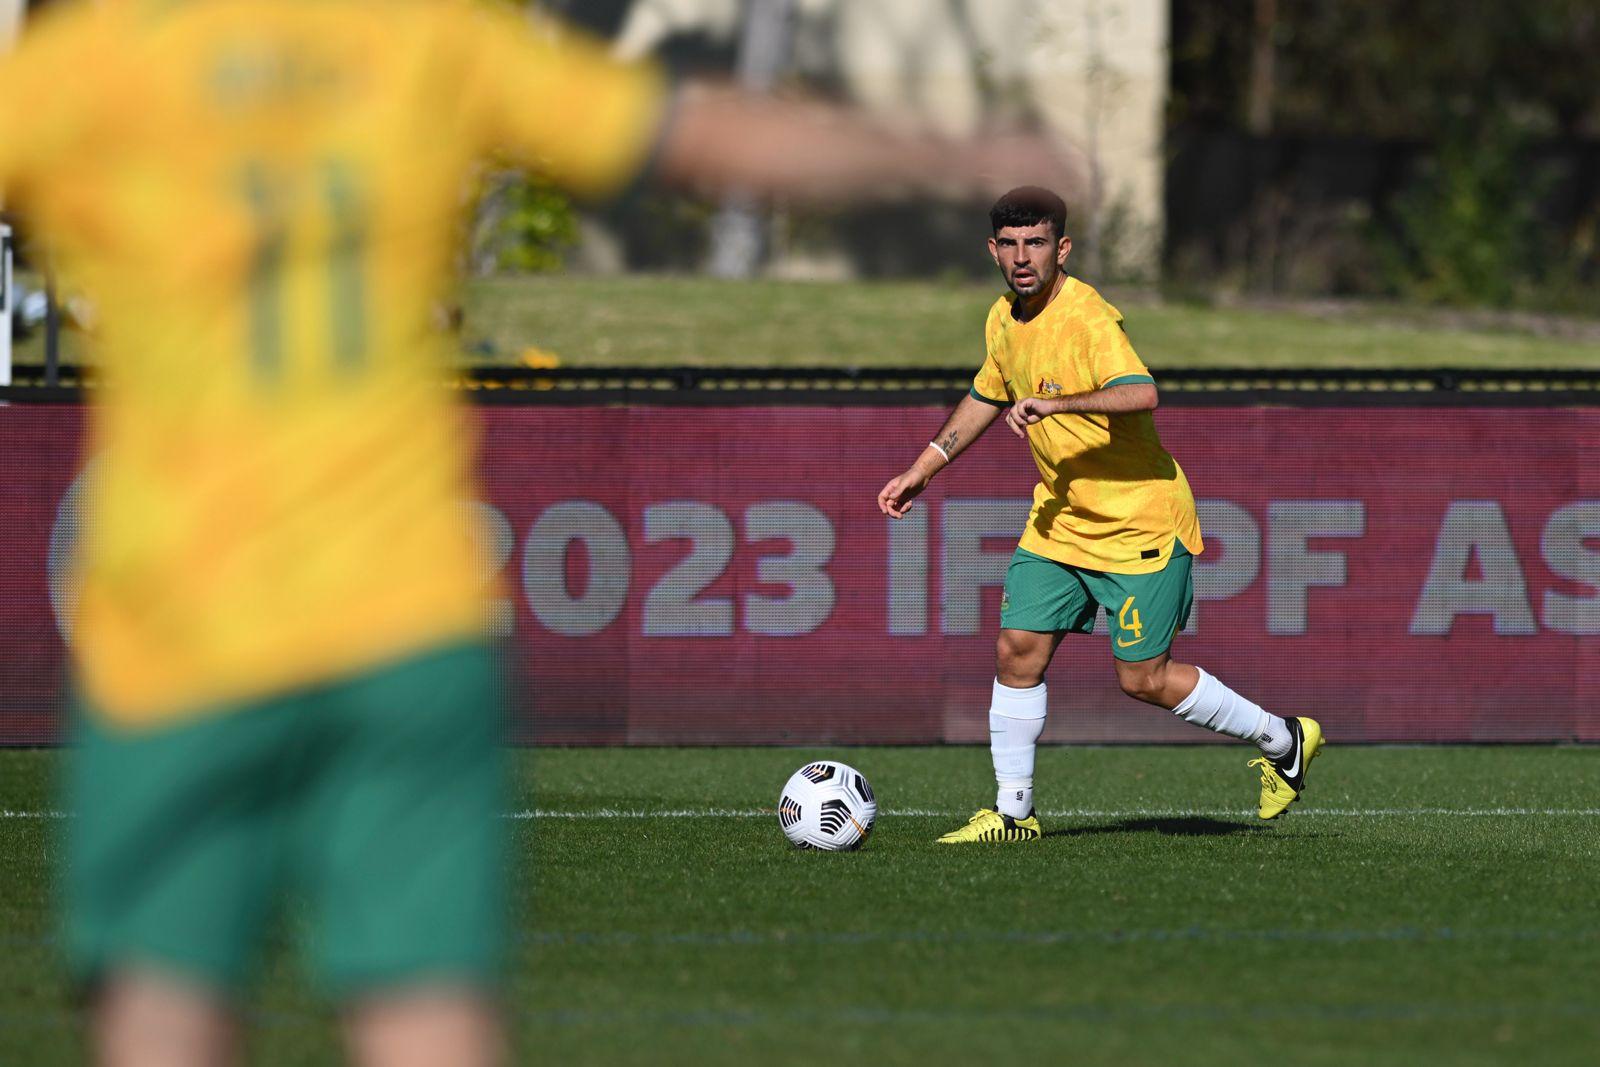 Alessandro La Verghetta of the CommBank Pararoos dribbles with the ball.